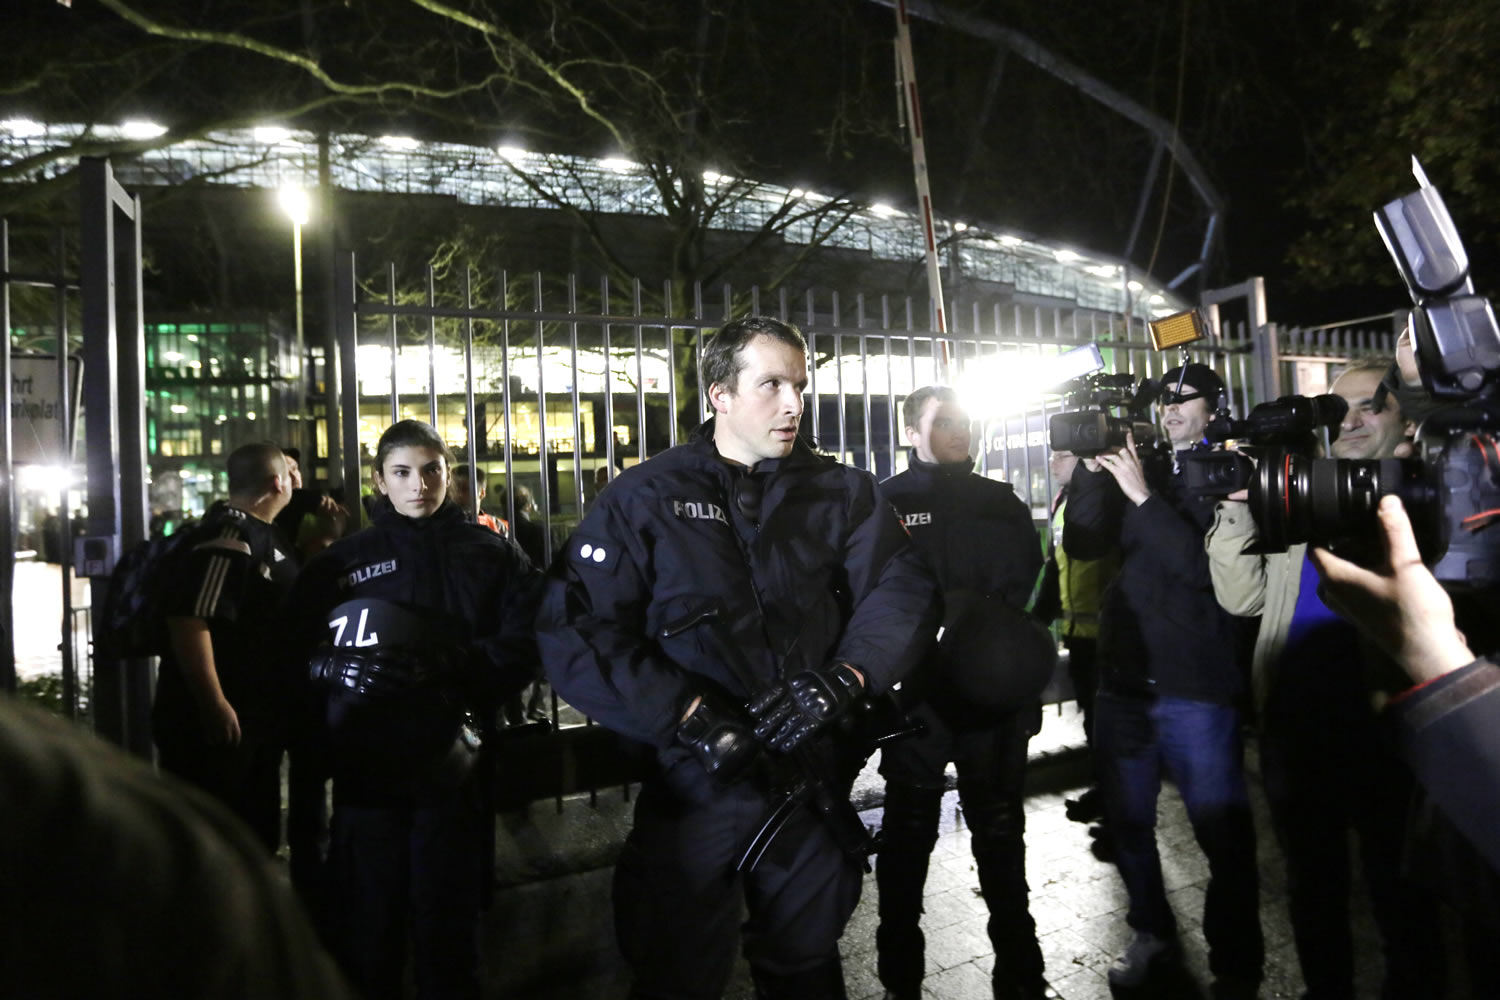 Police evacuate Hannover stadium due to “indications of an imminent attack”